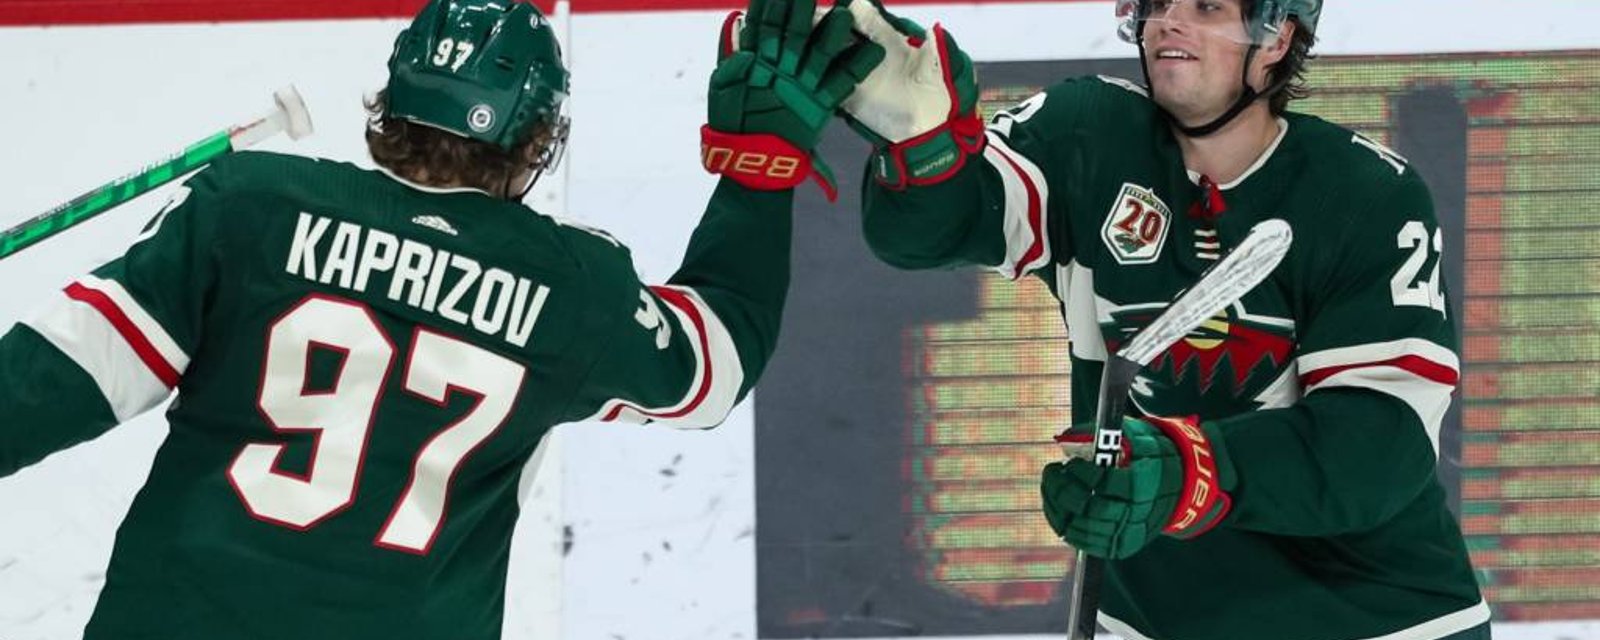 Another tough blow for the Wild as team could love another top forward… 